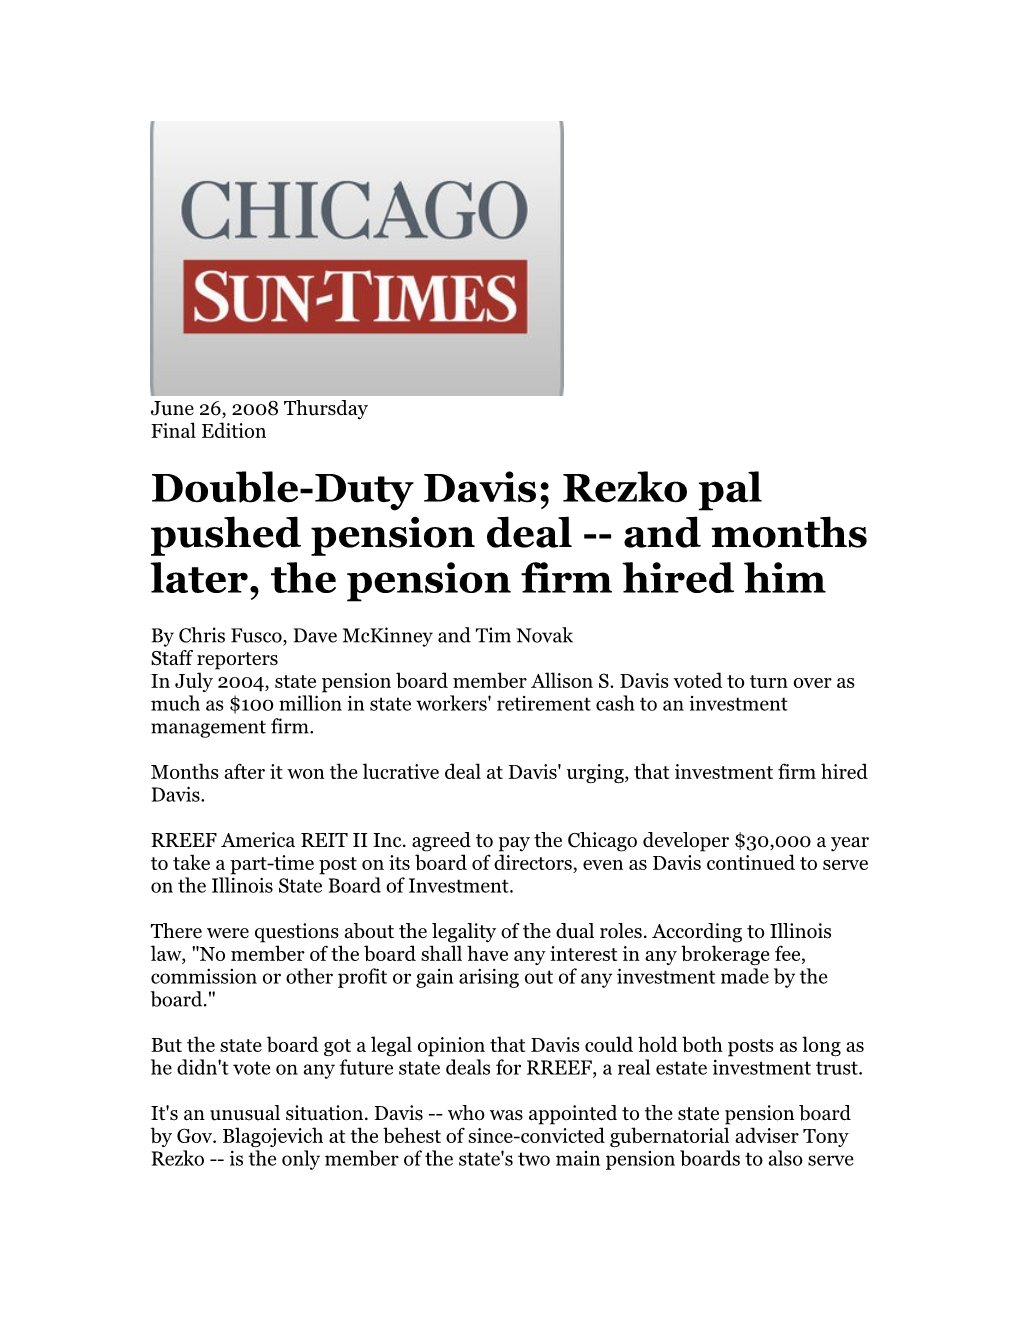 Double-Duty Davis; Rezko Pal Pushed Pension Deal and Months Later, the Pension Firm Hired Him